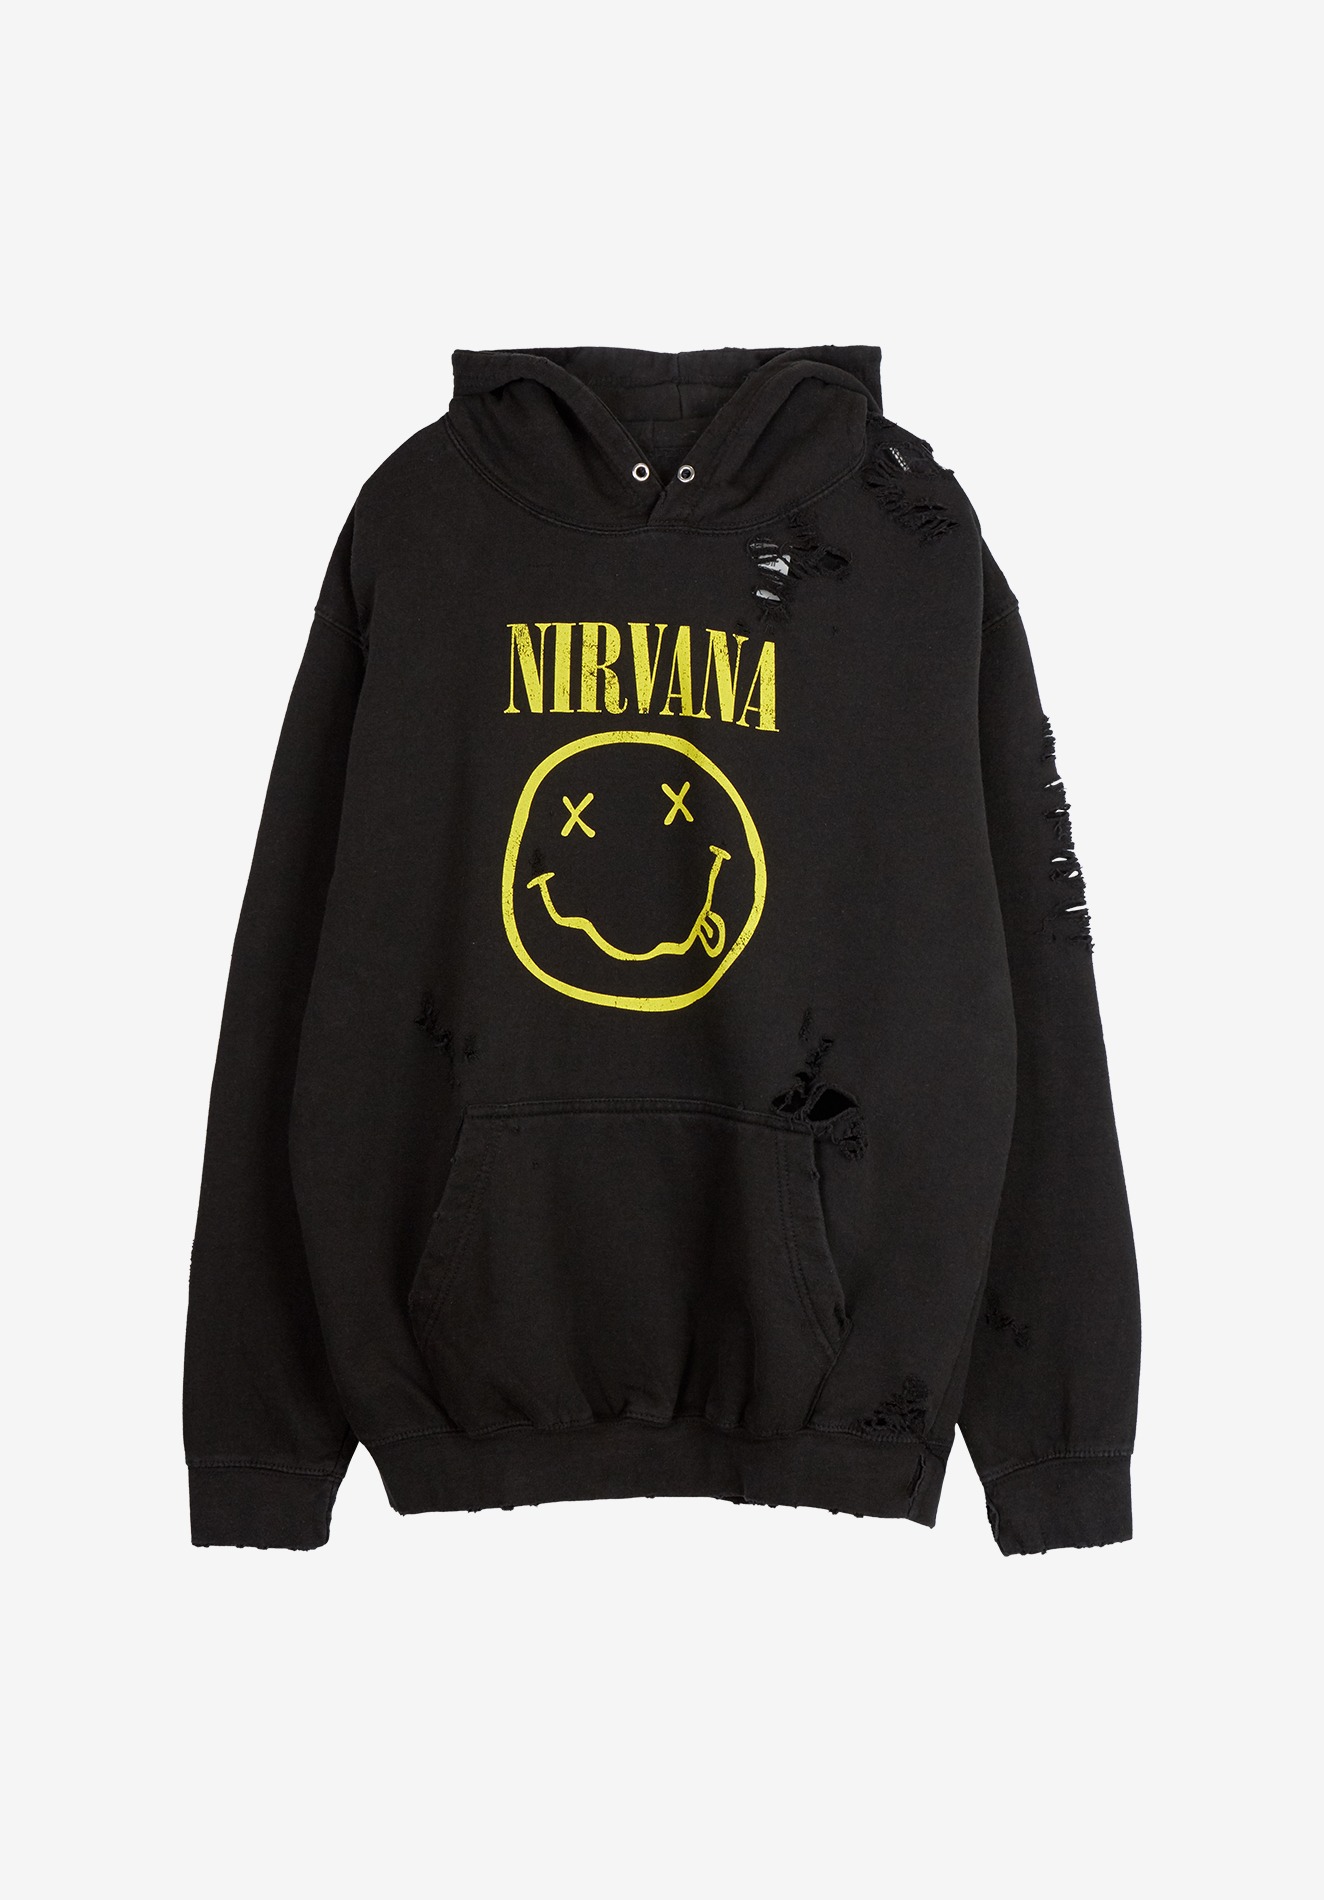 WORN-OUT BAND HOODIE NIRVANA, YELLOW